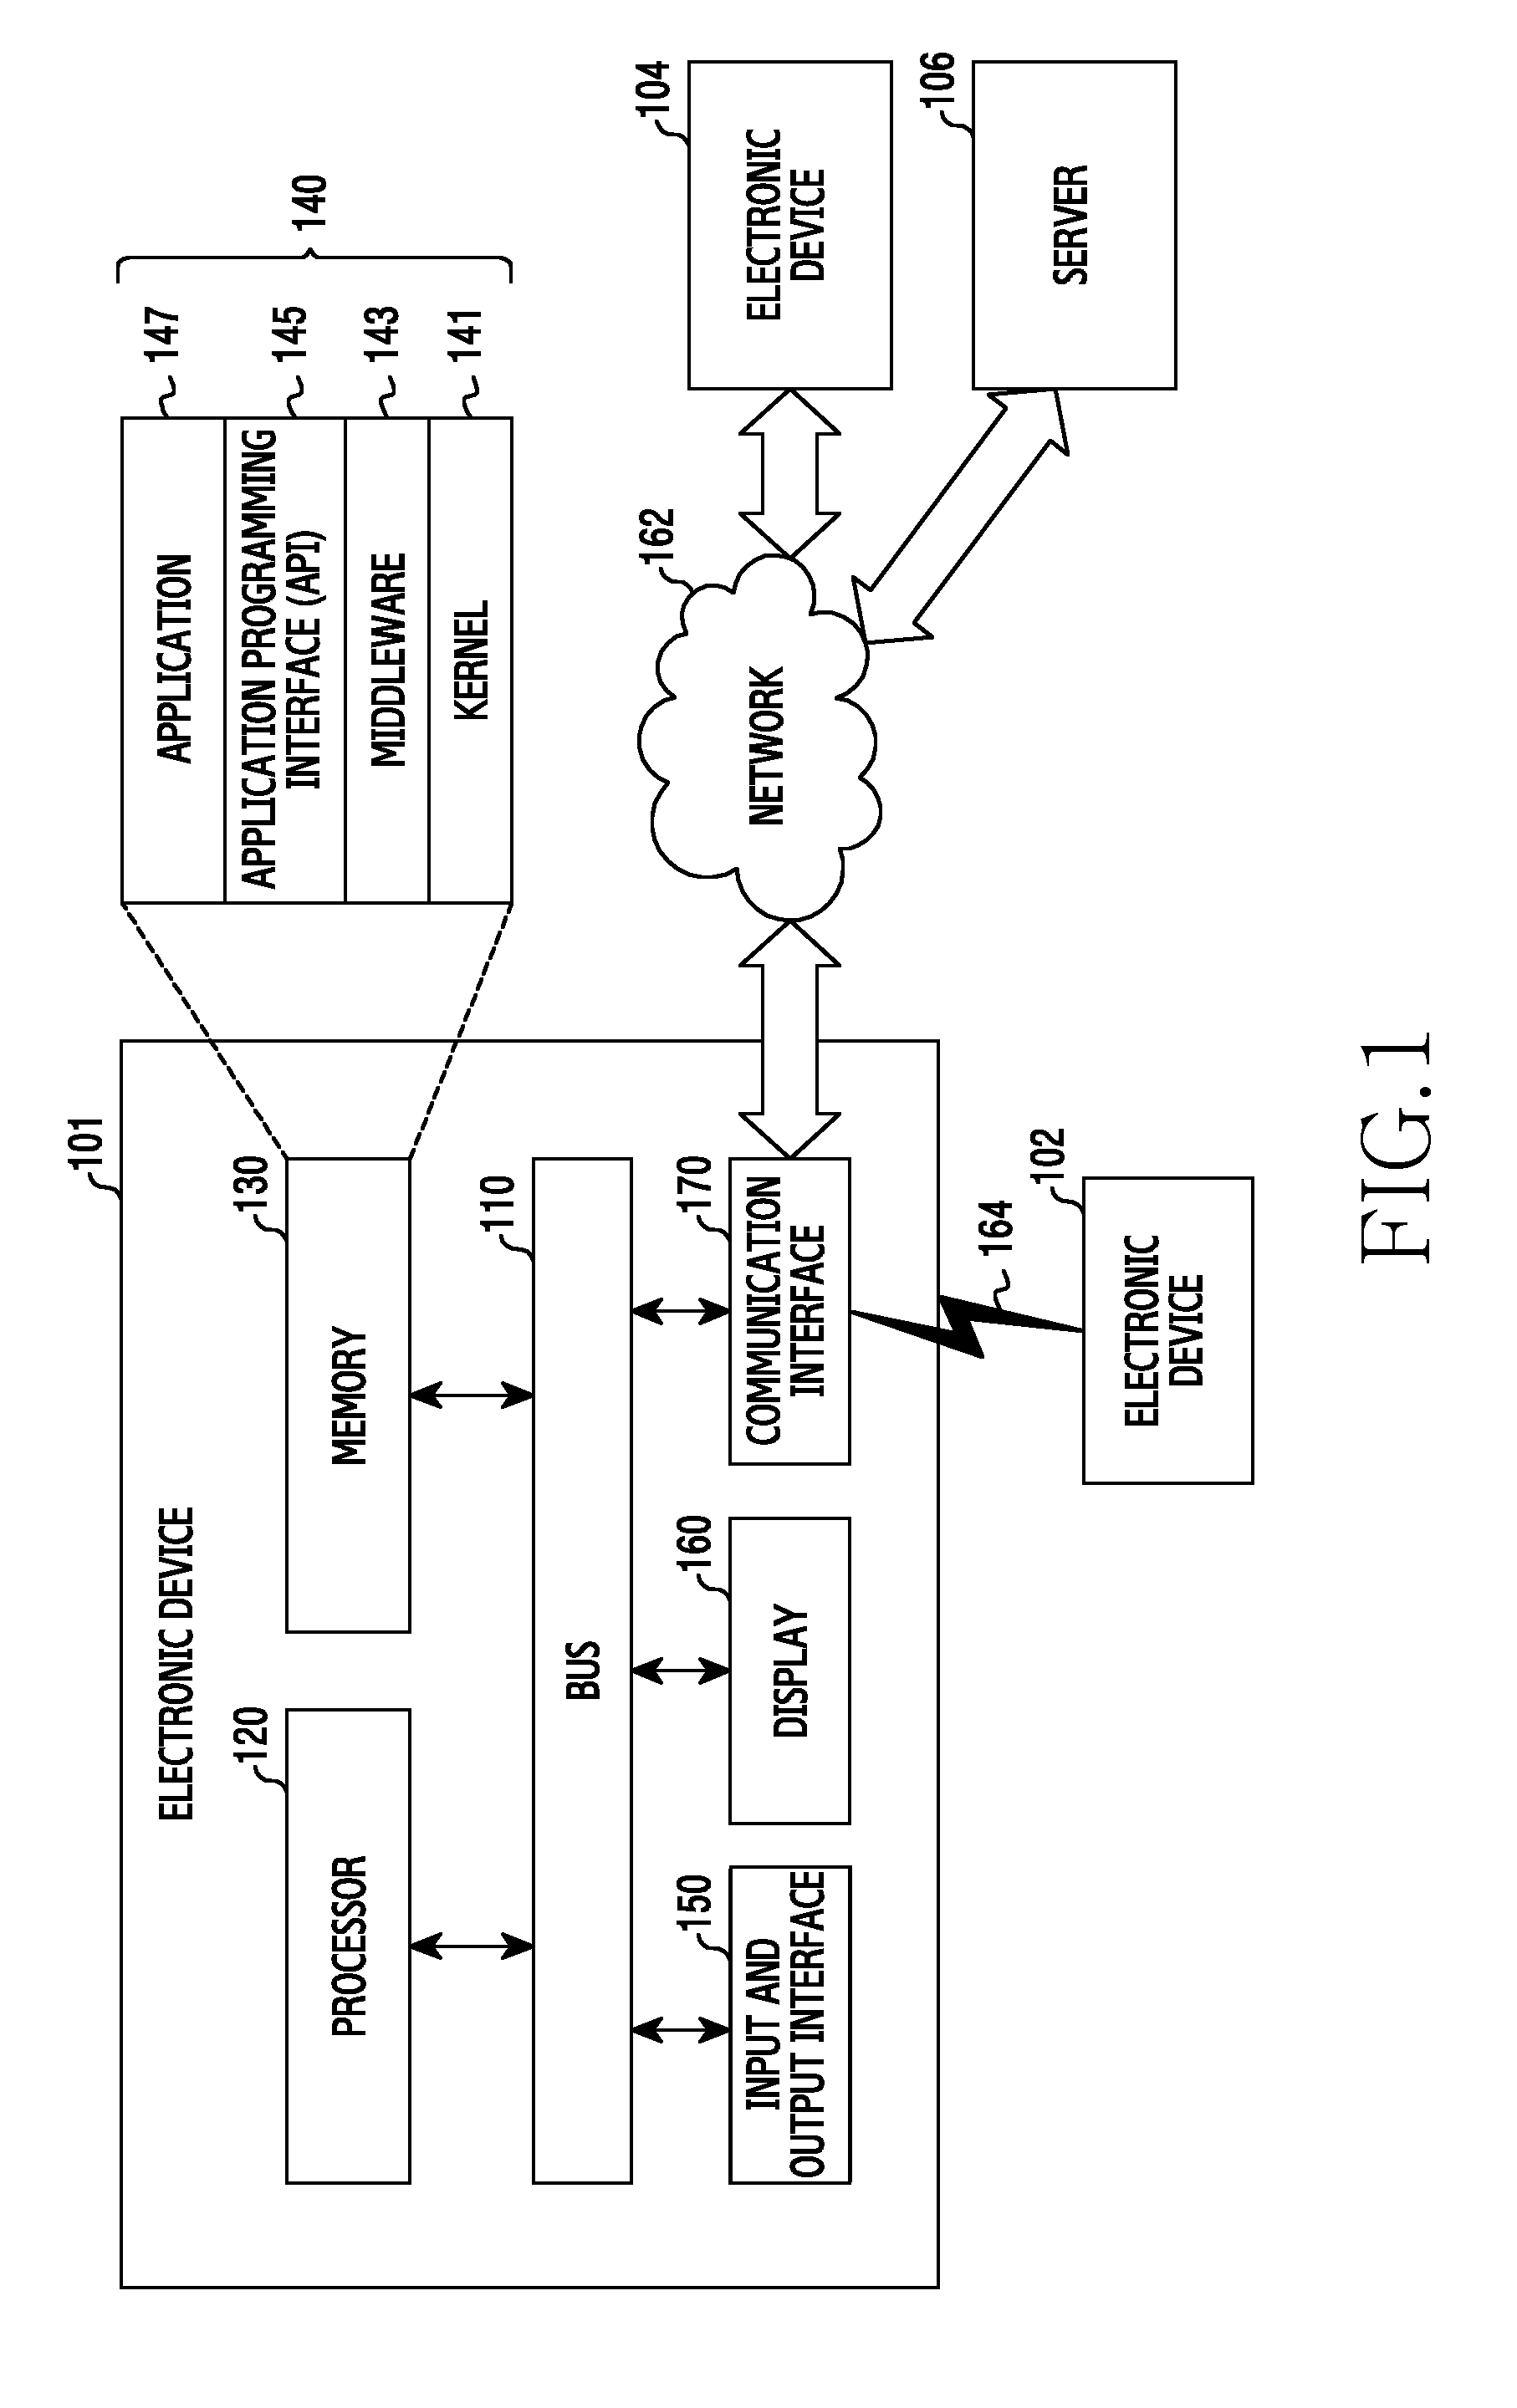 Method and device for supporting communication of electronic device